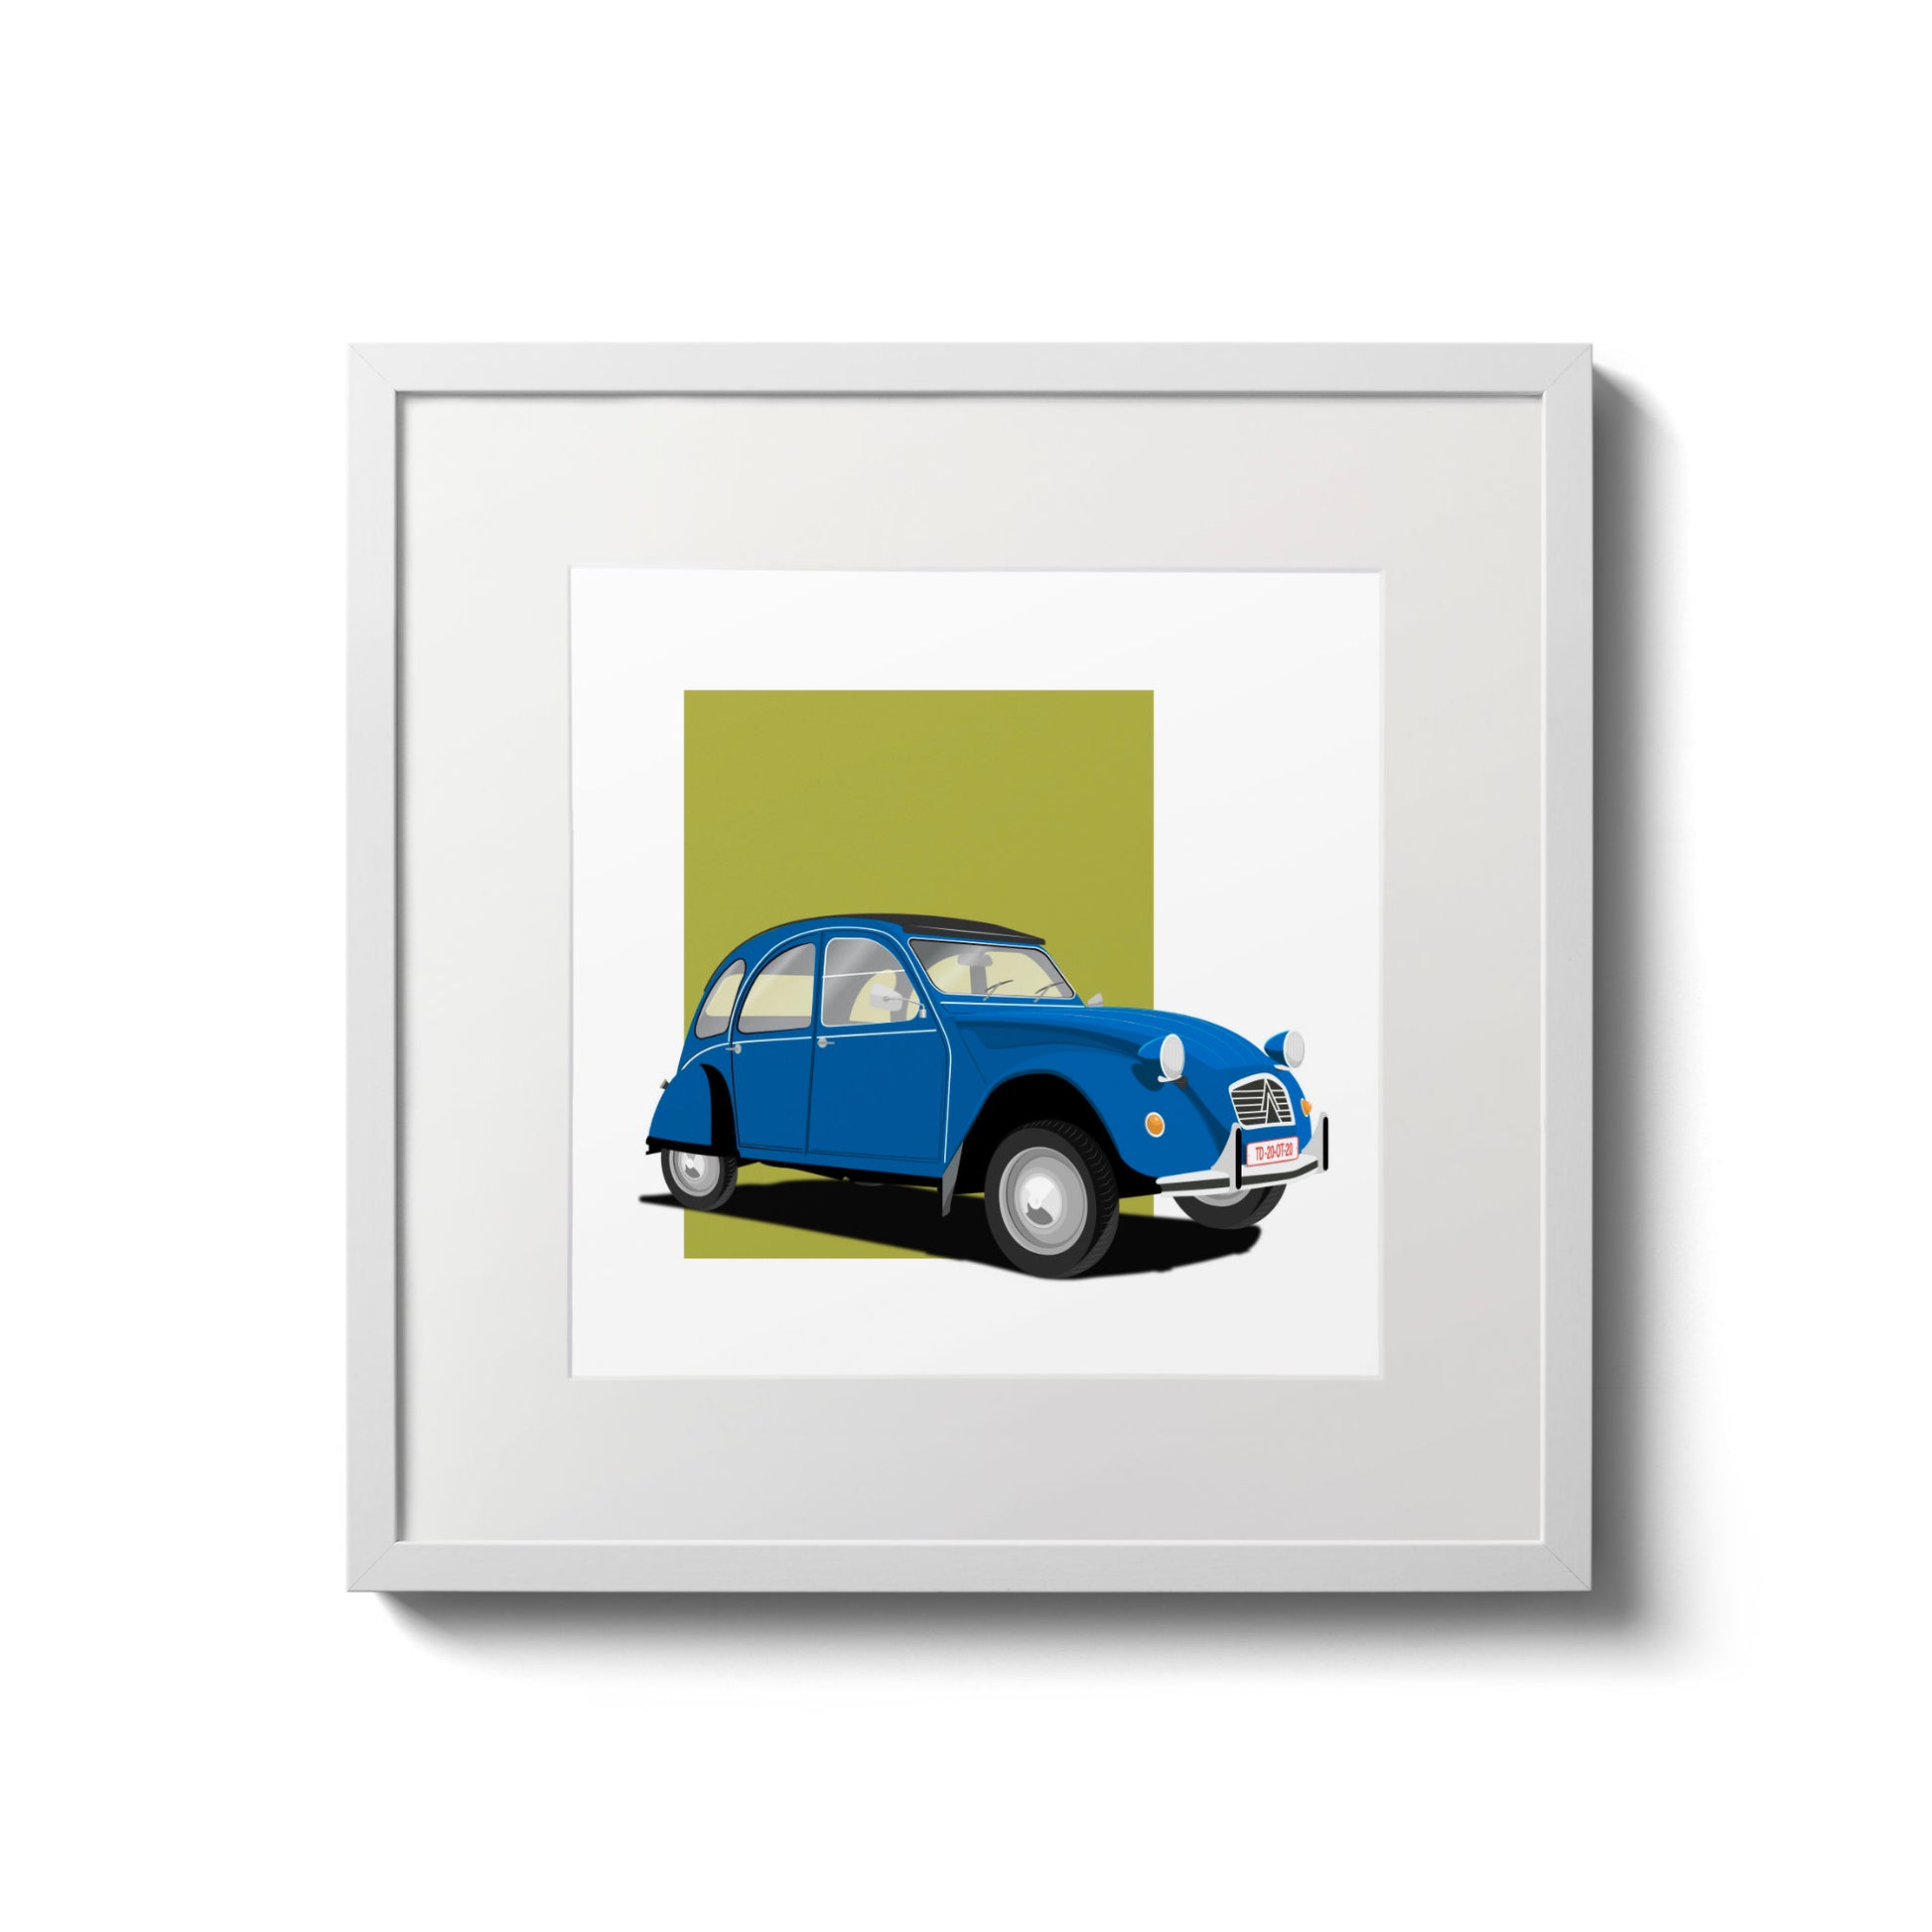 Illustration of a blue Citroën 2CV, in a white frame and measuring 20 by 20 cm